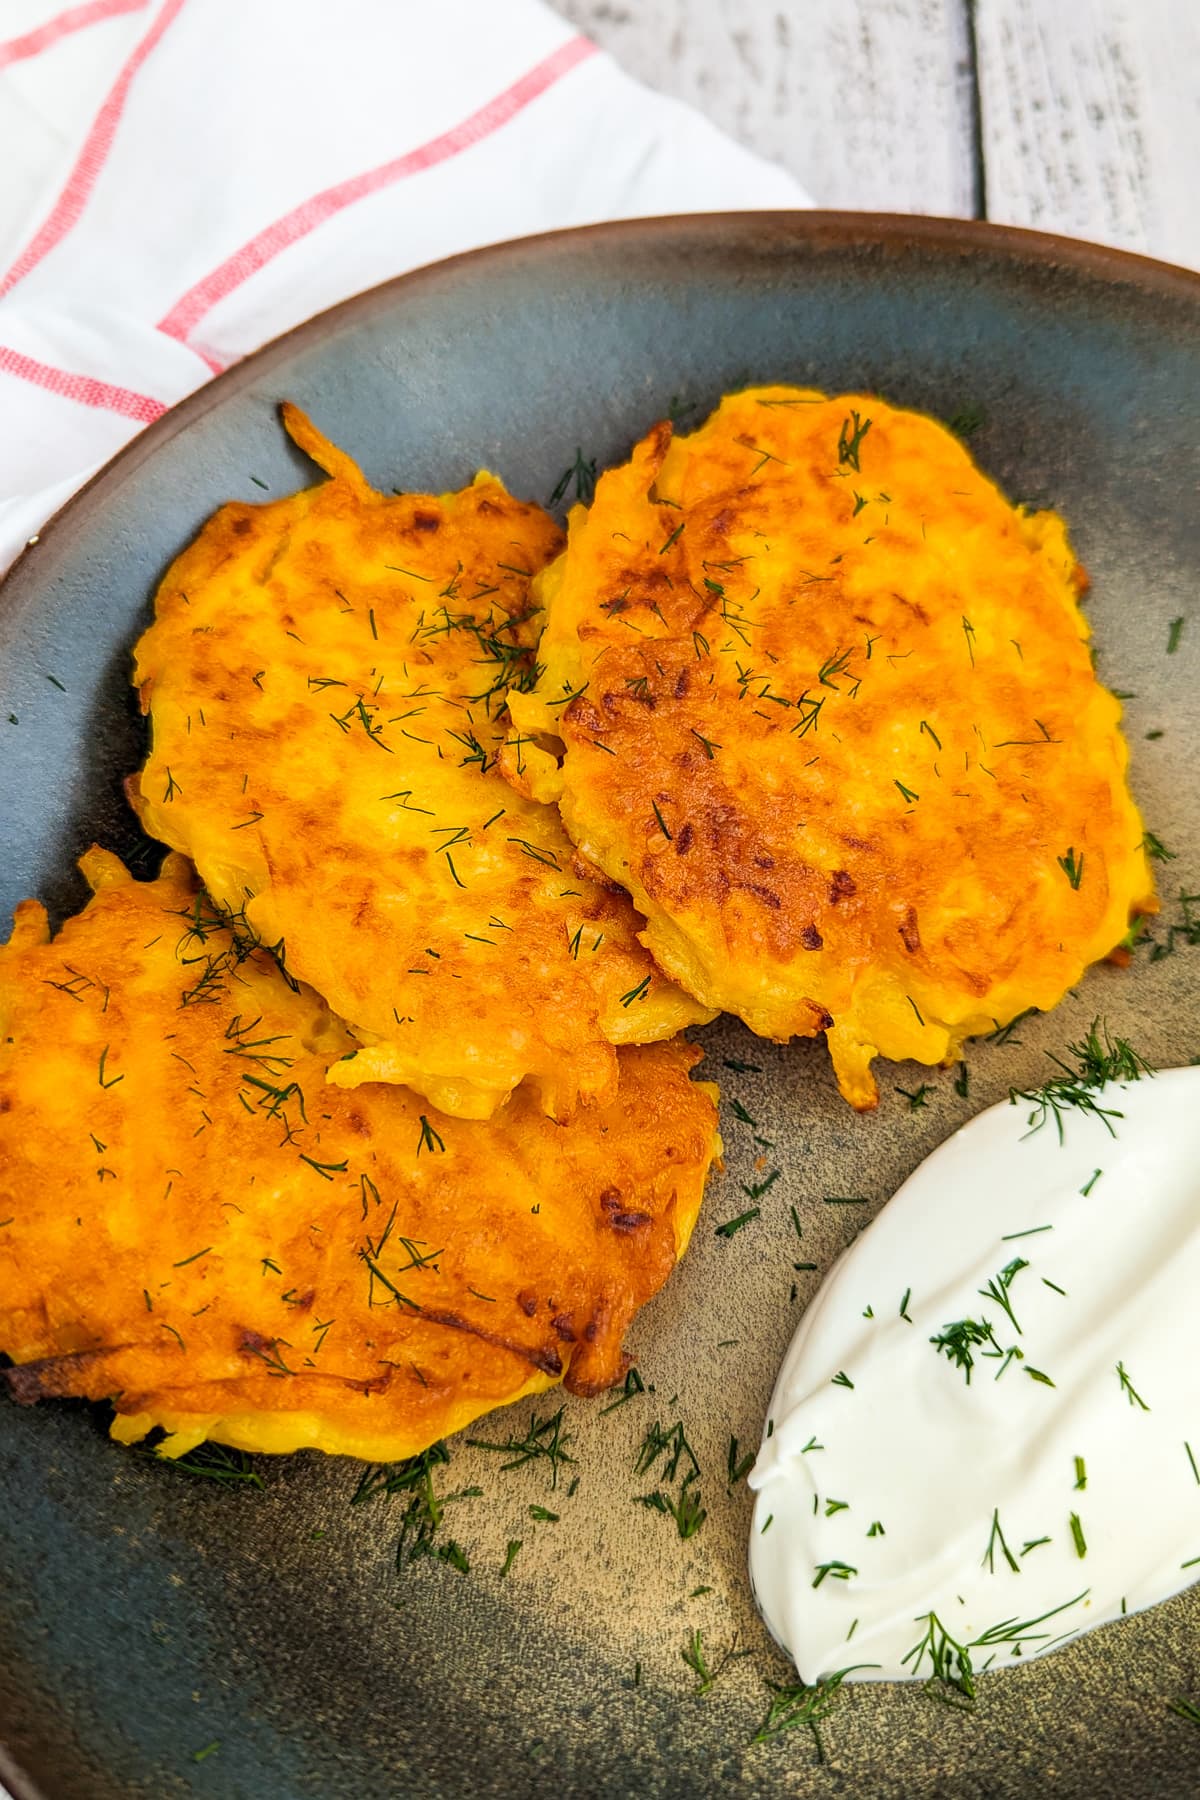 3 pumpkin fritters with sour cream, dill in a vintage plate on a wooden table.